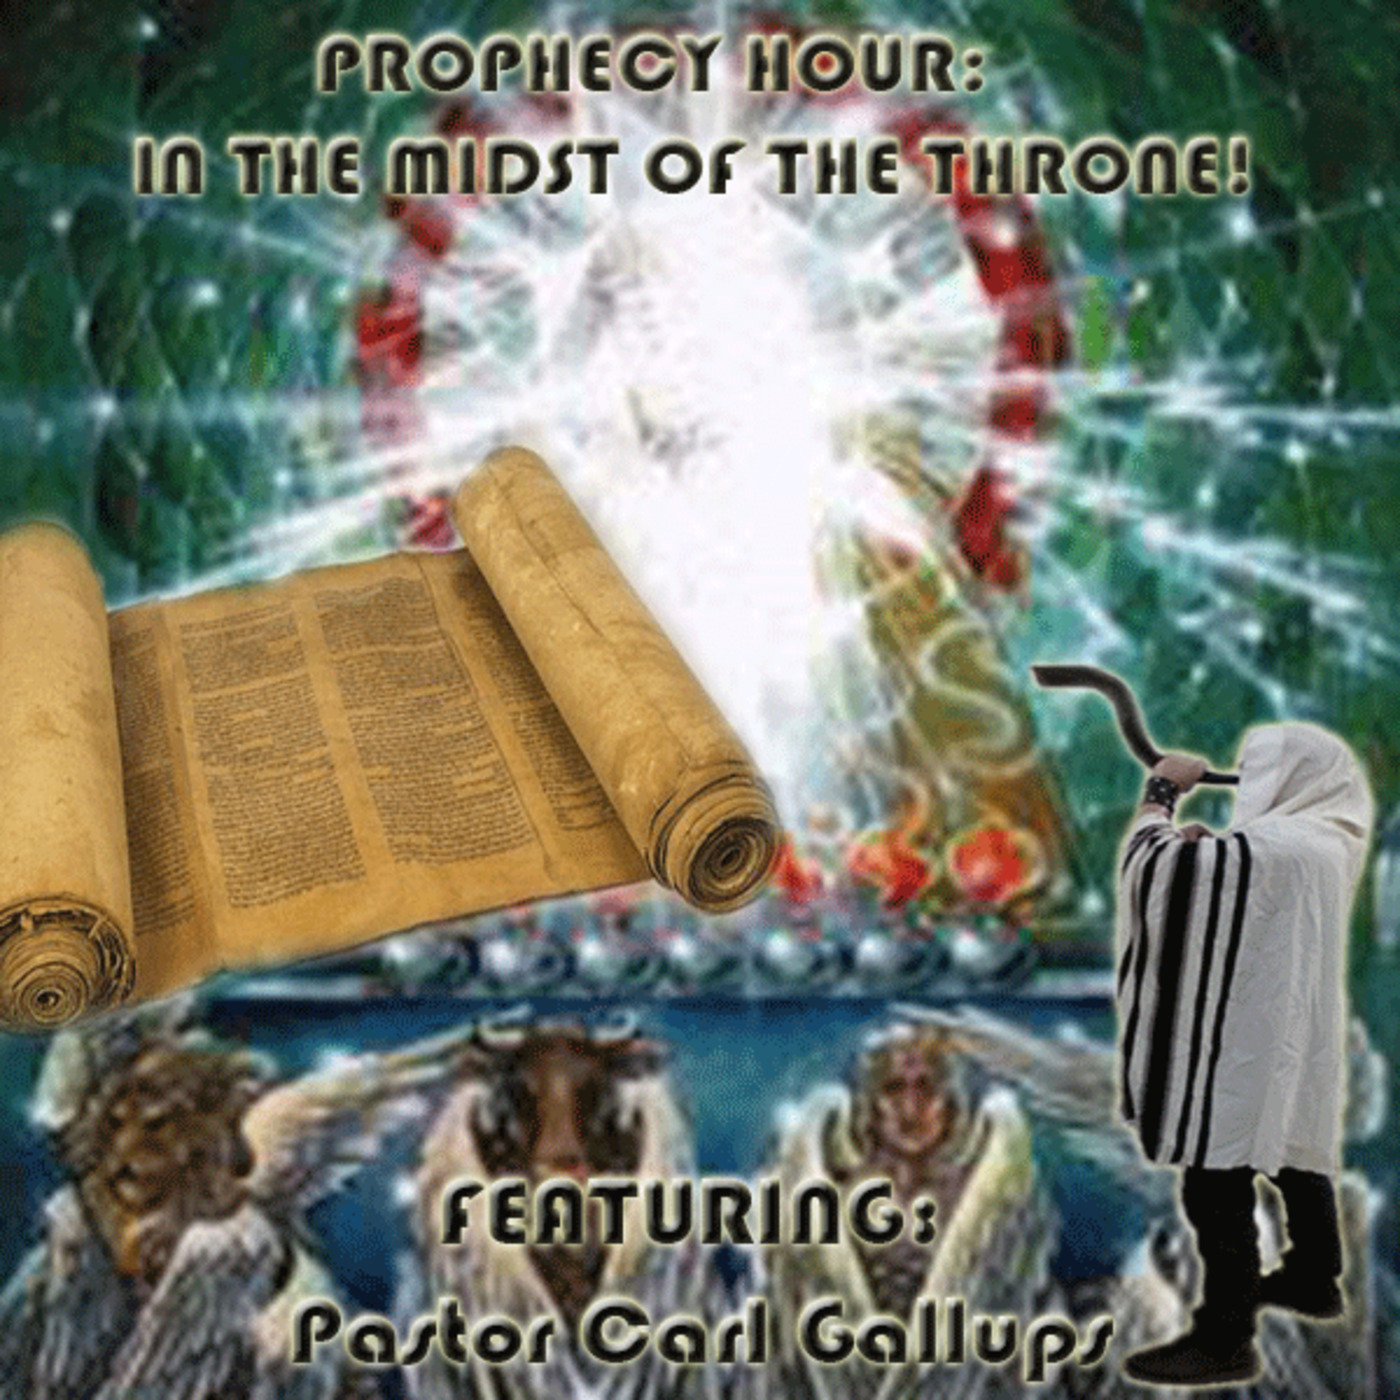 Episode 1136: PROPHECY HOUR: IN THE MIDST OF THE THRONE!